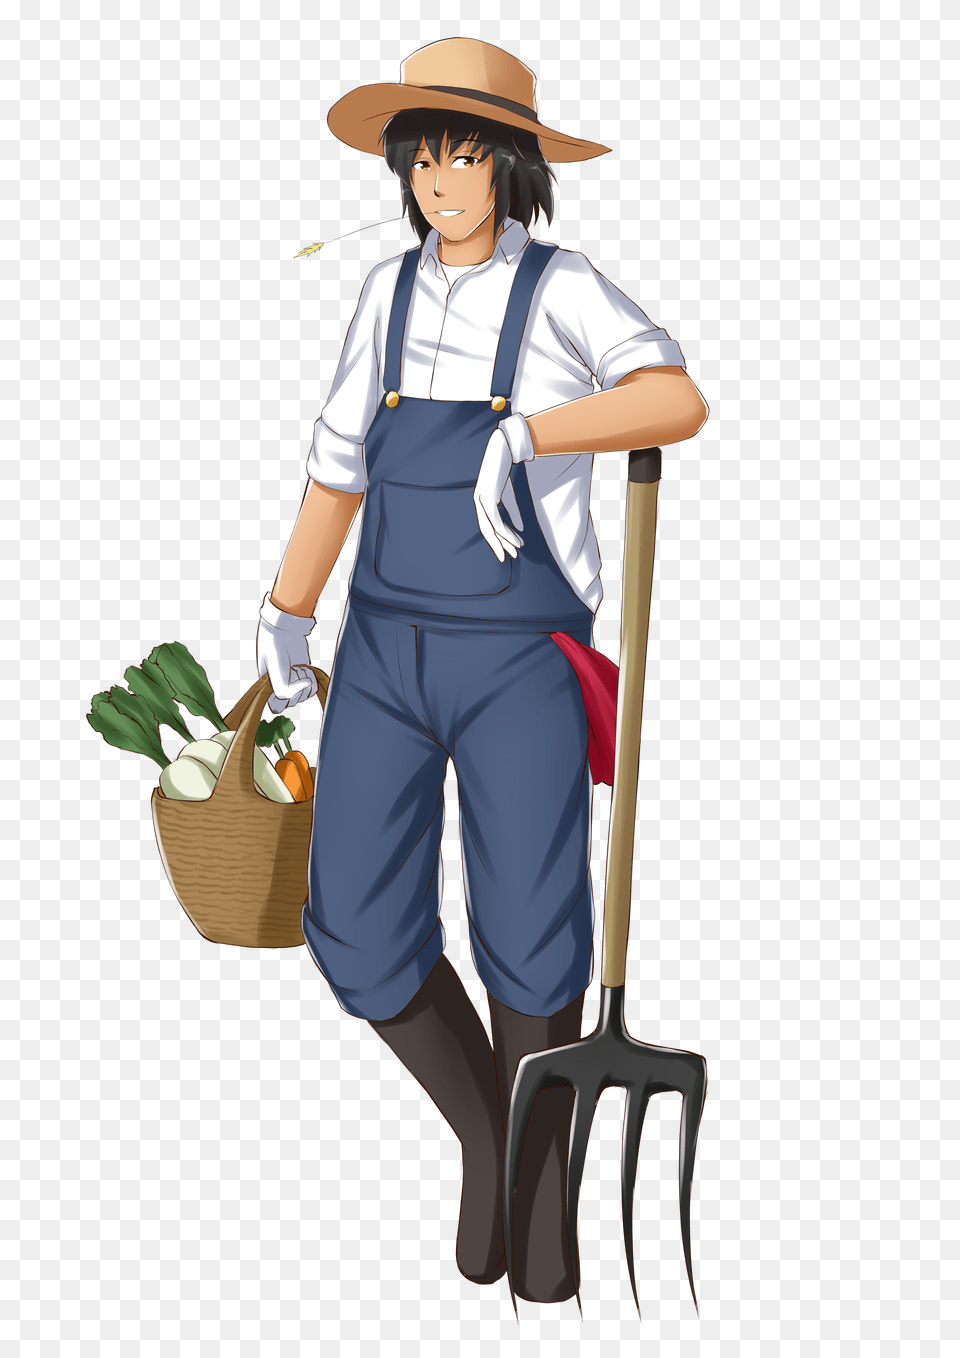 Farmer, Outdoors, Nature, Garden, Adult Png Image